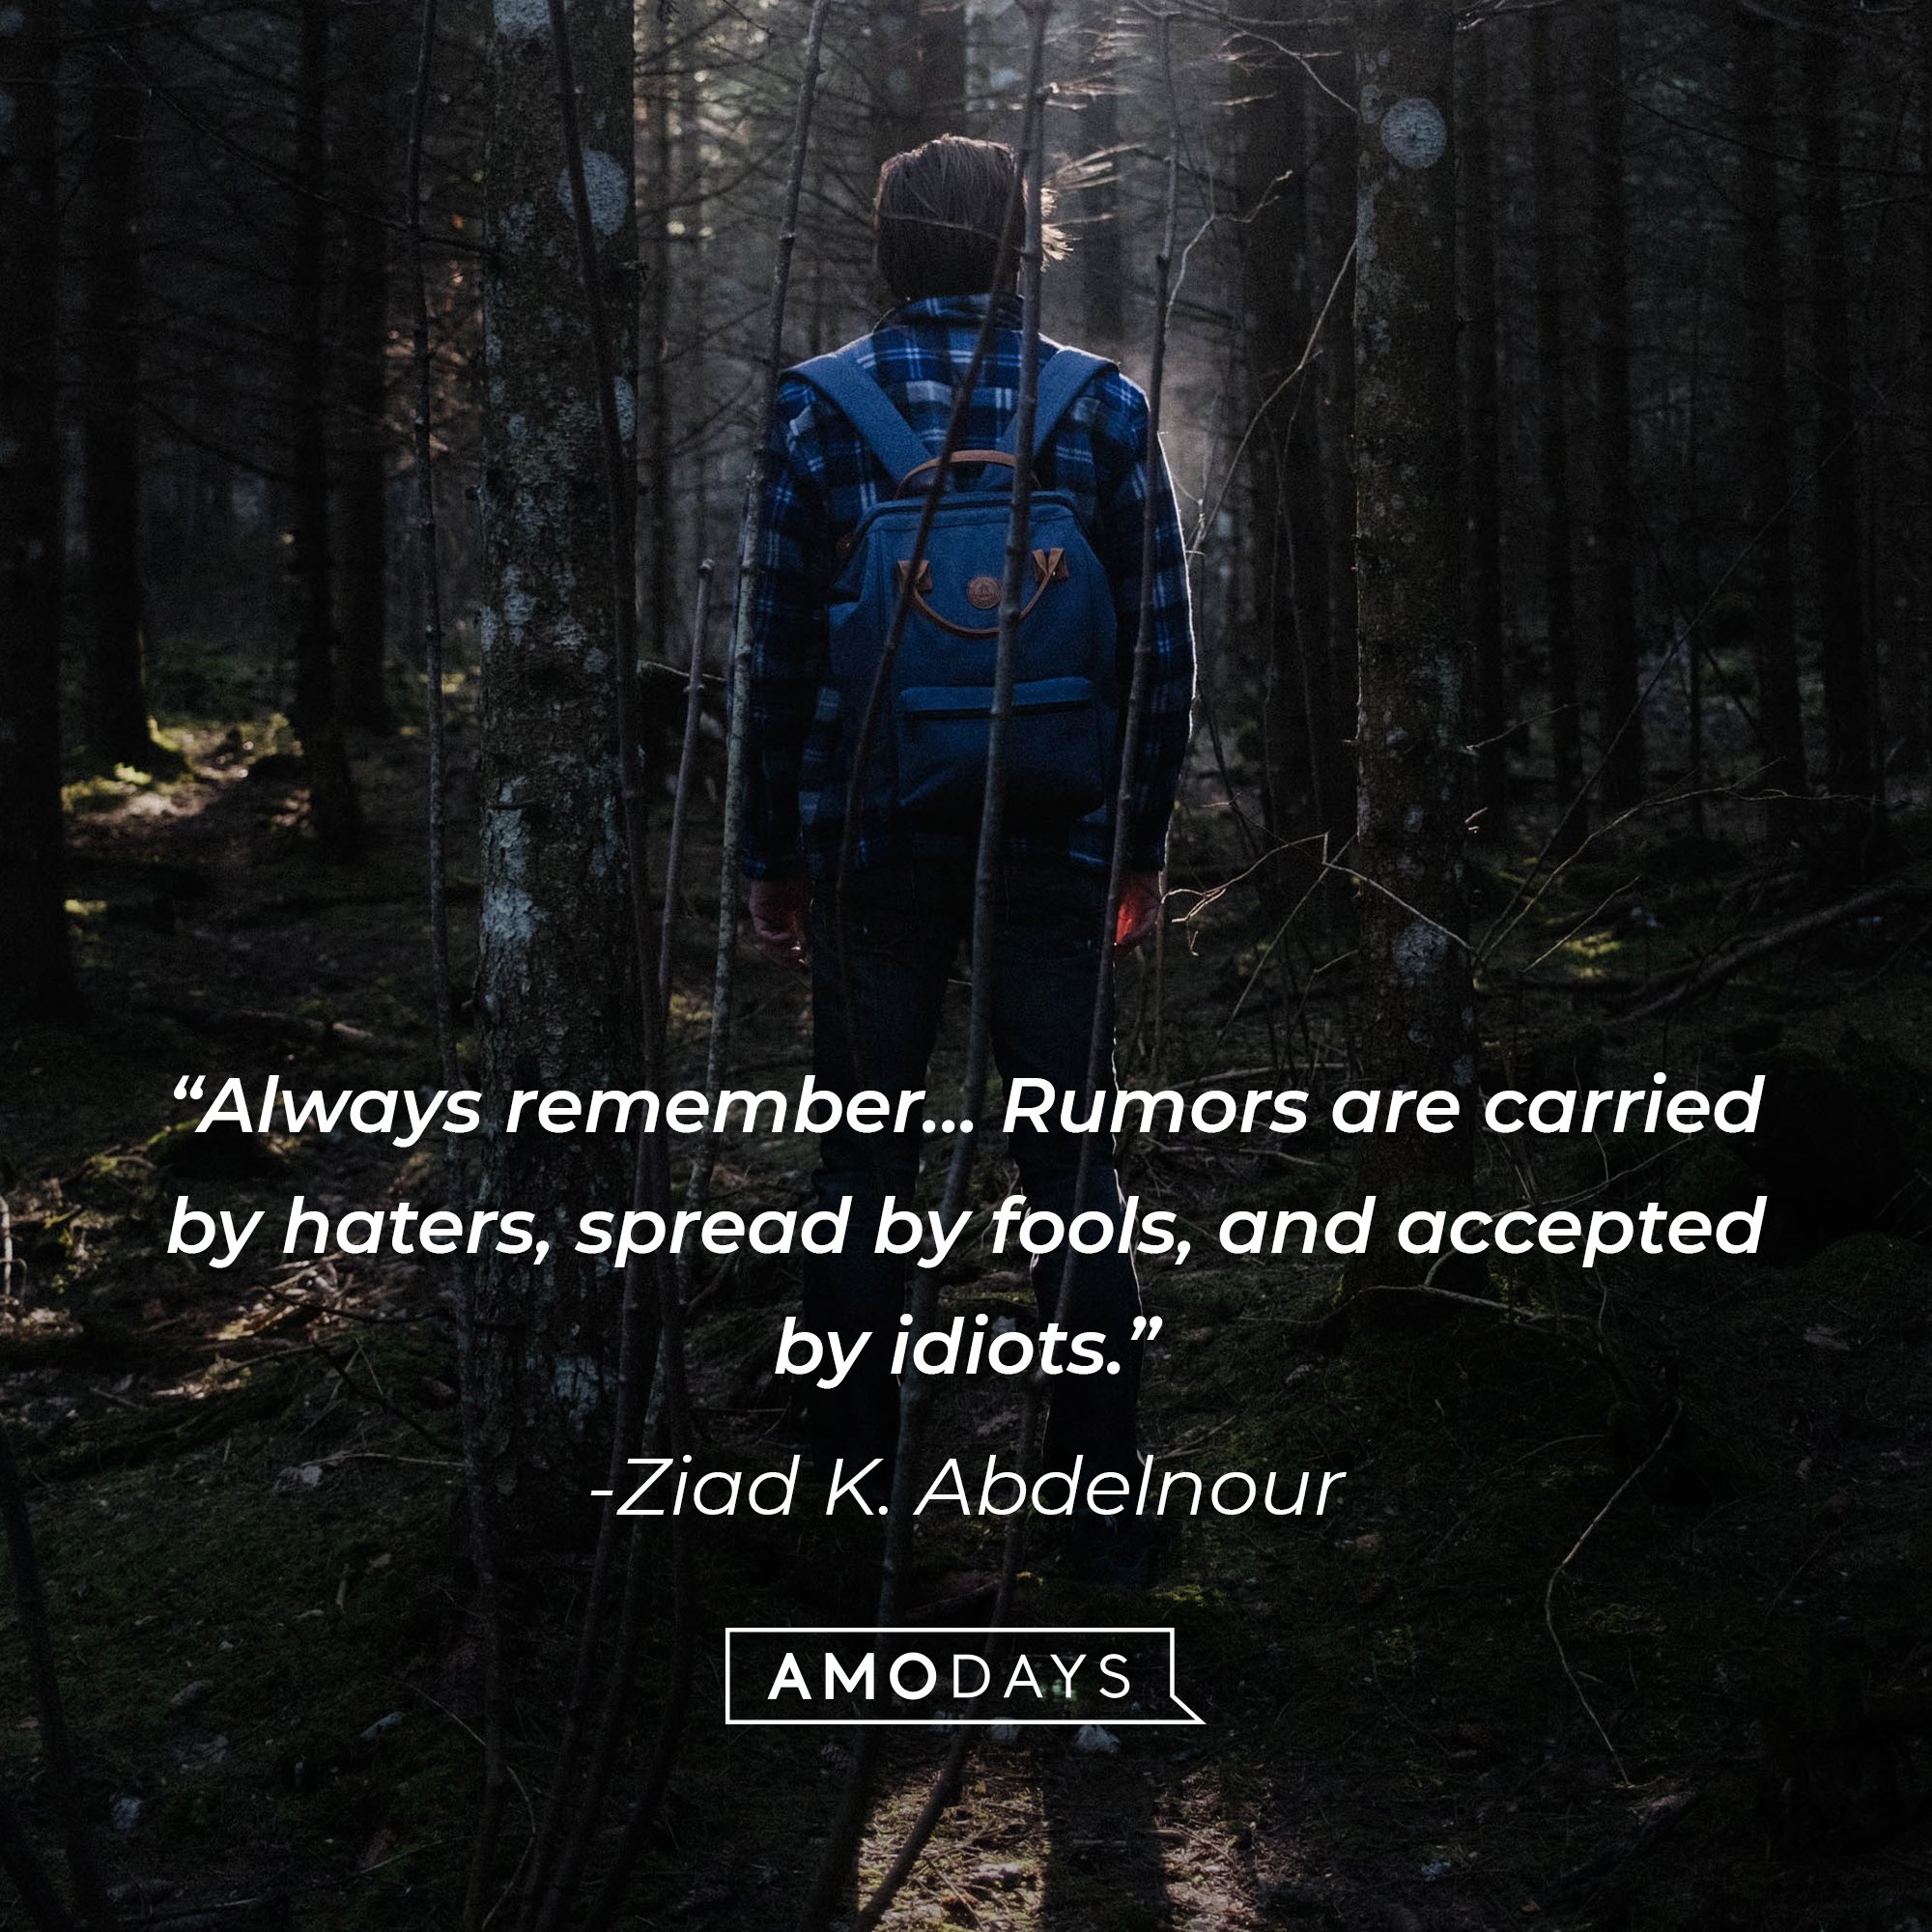 Ziad K. Abdelnour’s quote: “Always remember... Rumors are carried by haters, spread by fools, and accepted by idiots.” | Image: Amodays   